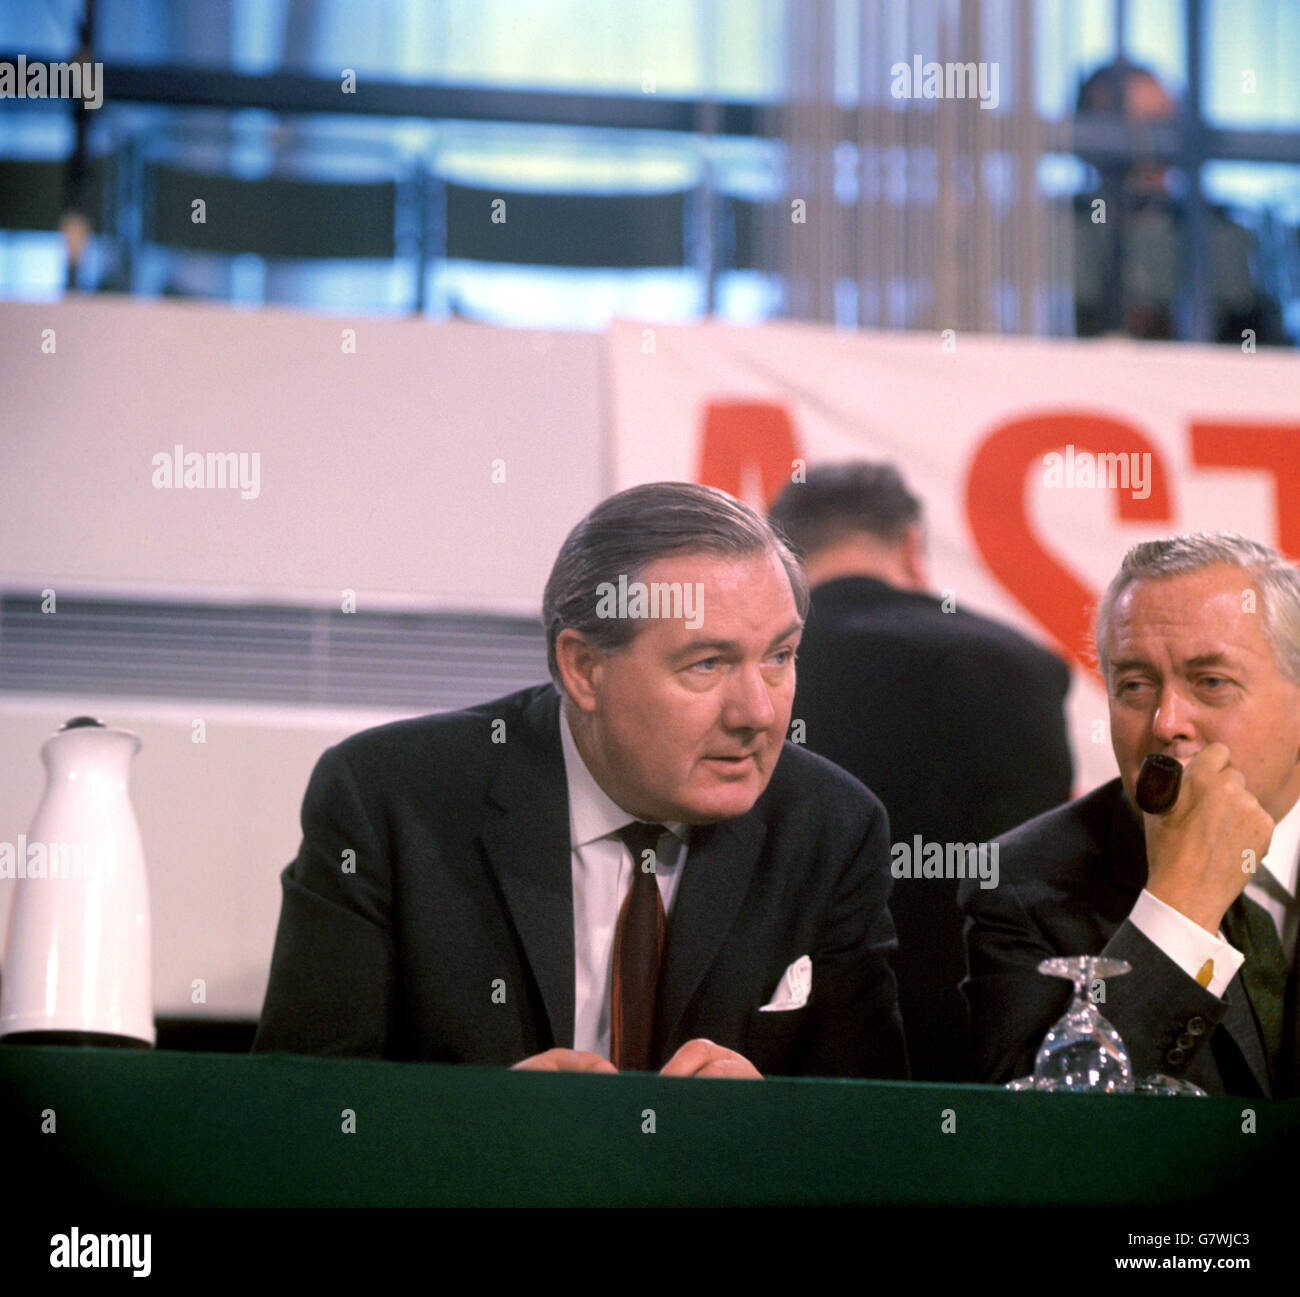 James Callaghan (l) and Harold Wilson (Prime Minister) pictured at the Labour Party Conference in Brighton. Stock Photo